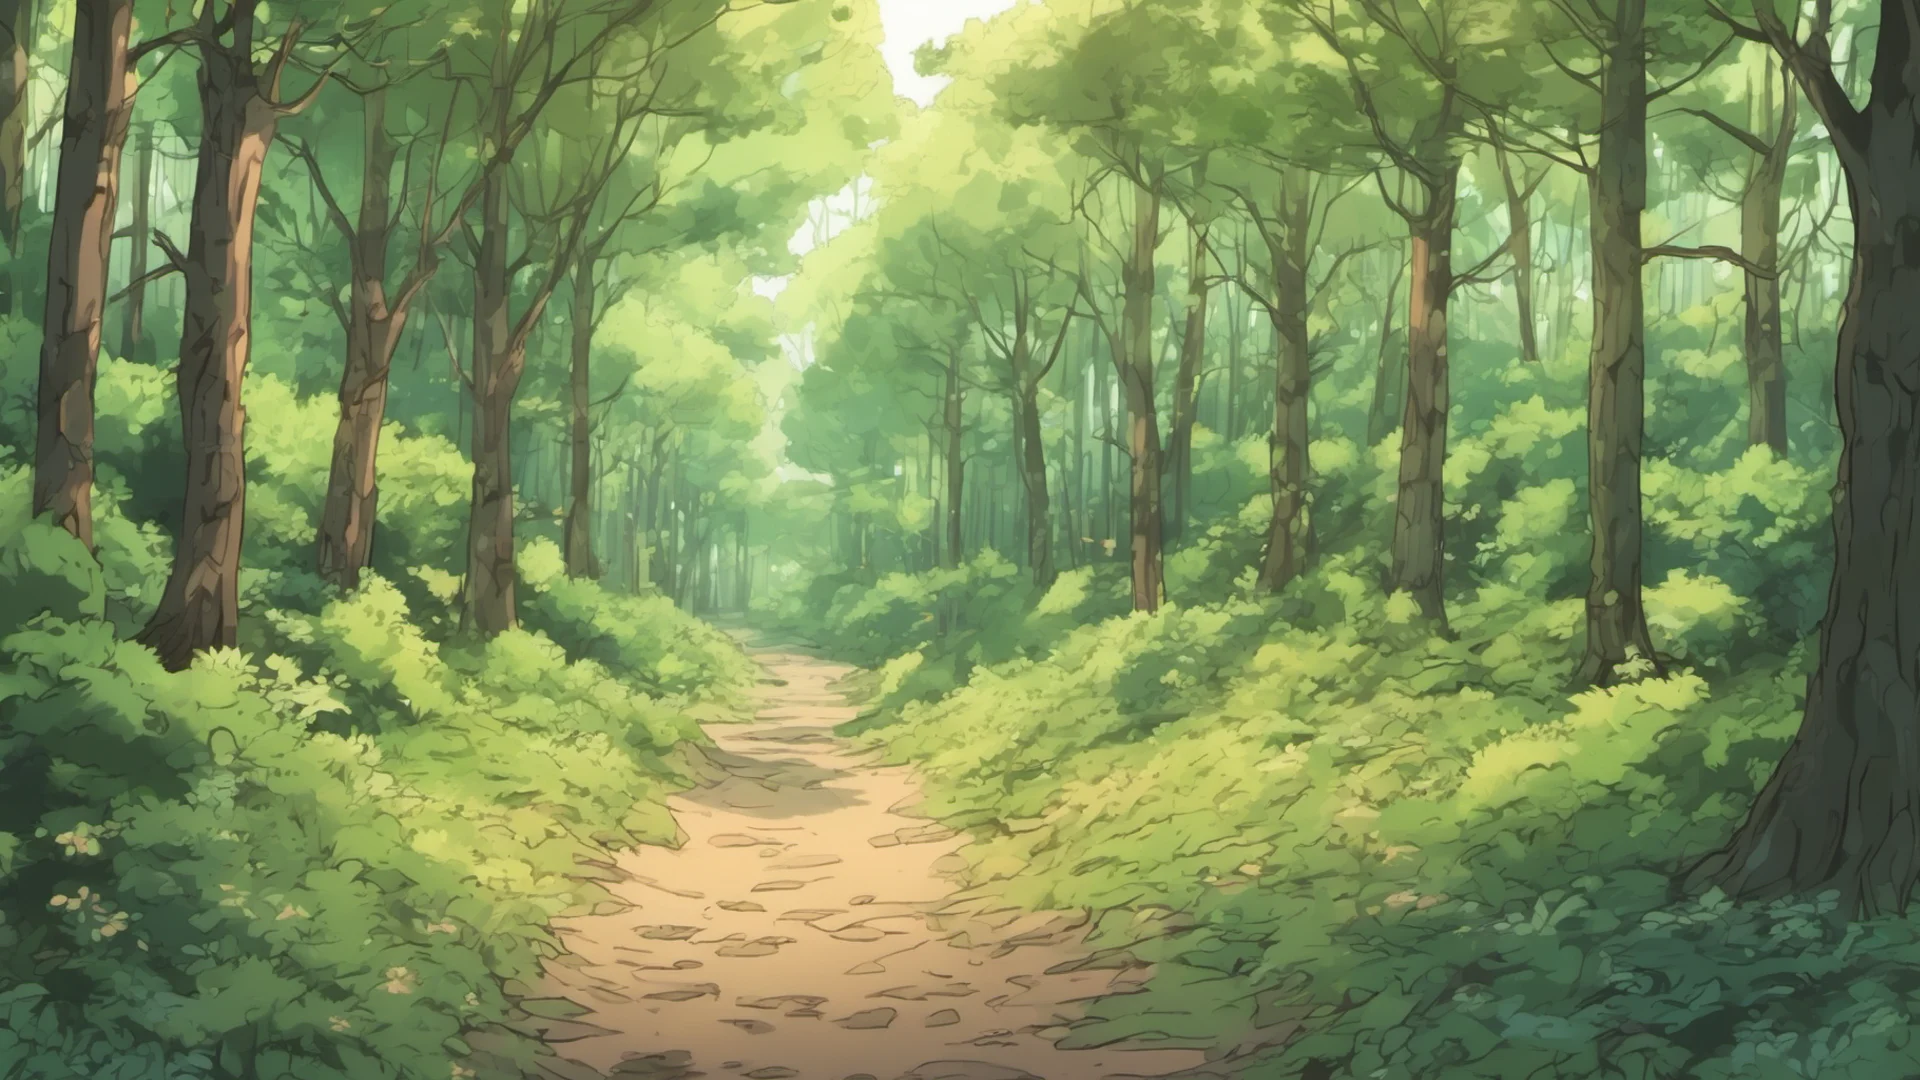 anime style summer forest with a dirt path in the middle wide